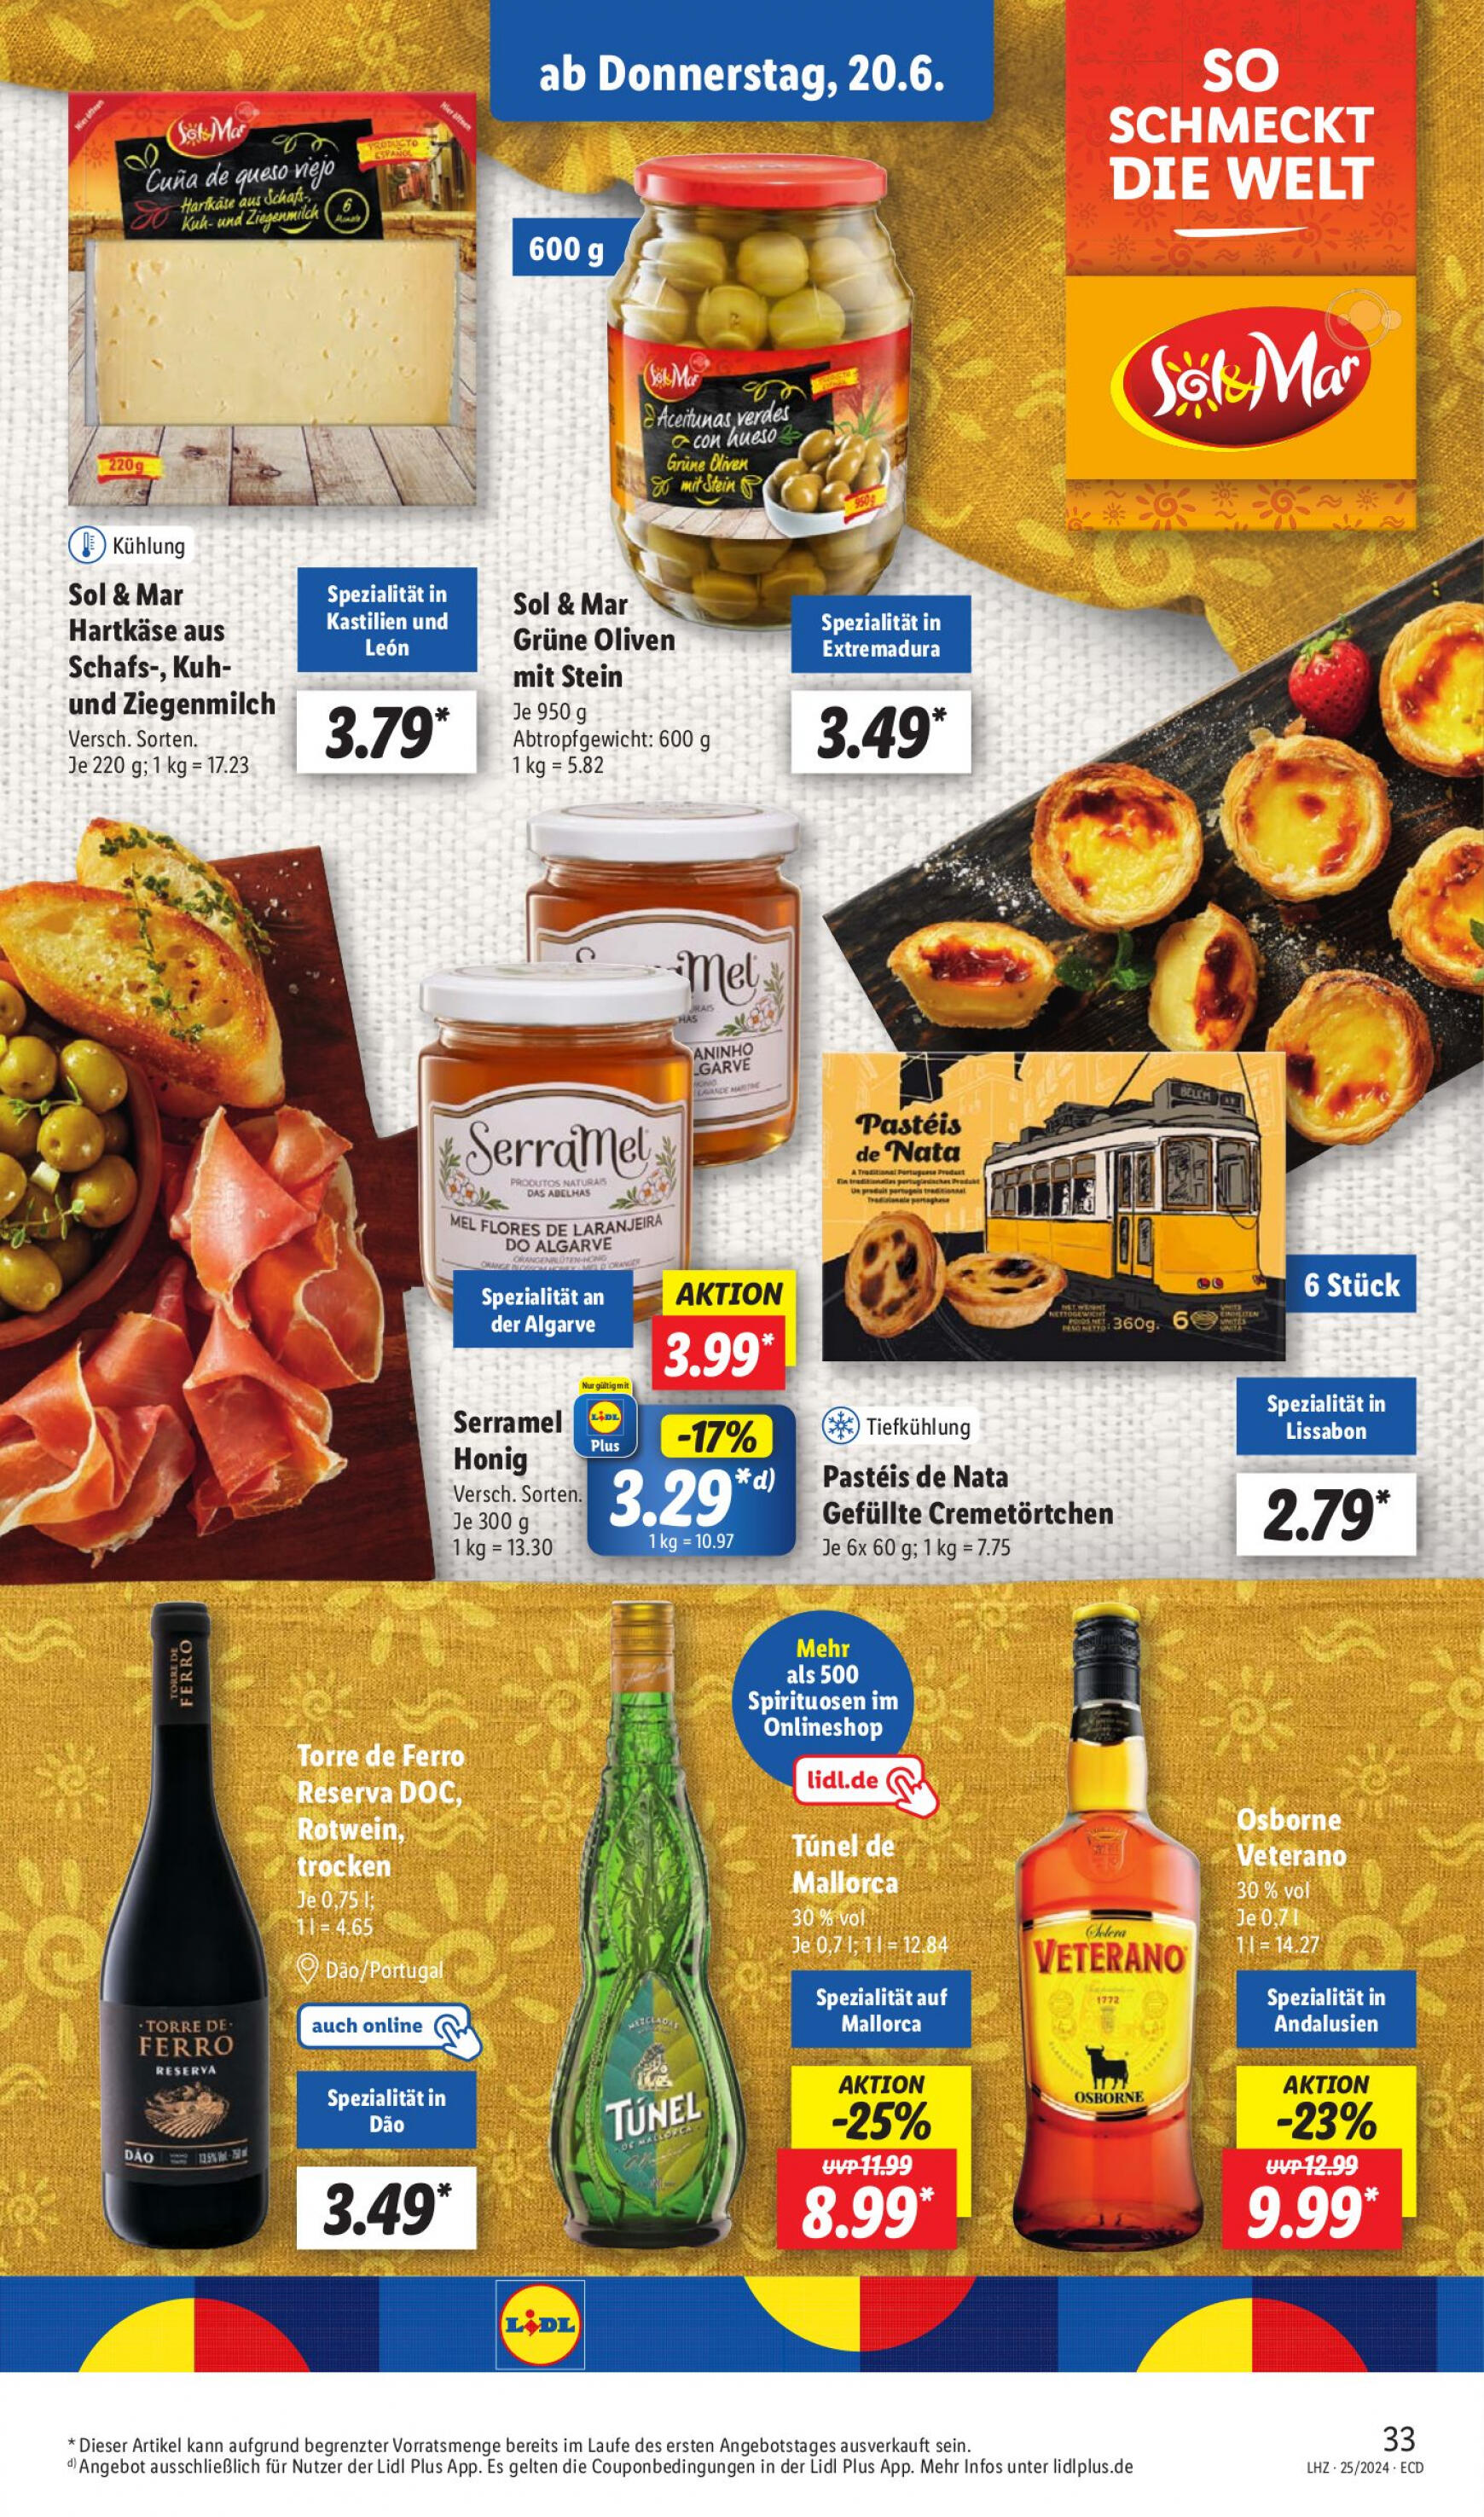 lidl - Flyer Lidl aktuell 17.06. - 22.06. - page: 43